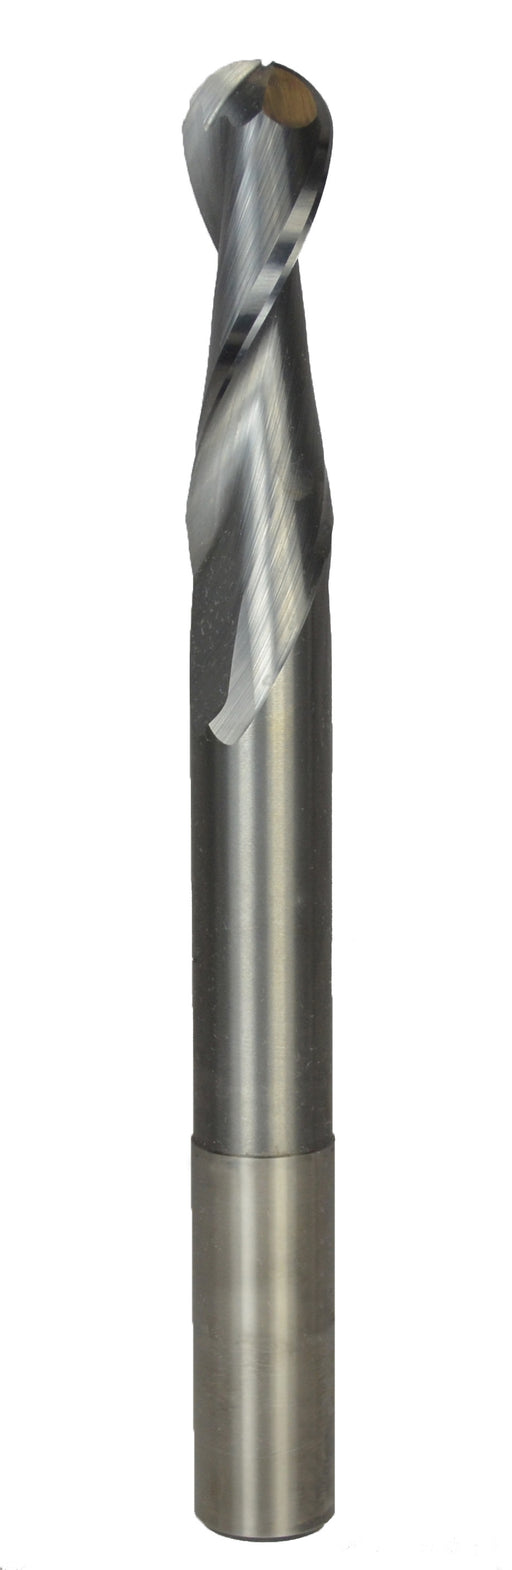 Solid Tungsten Spiral Upcut Ballnose Cutter - 2 Flute - Metric Range - Long Series - tungstenandtool